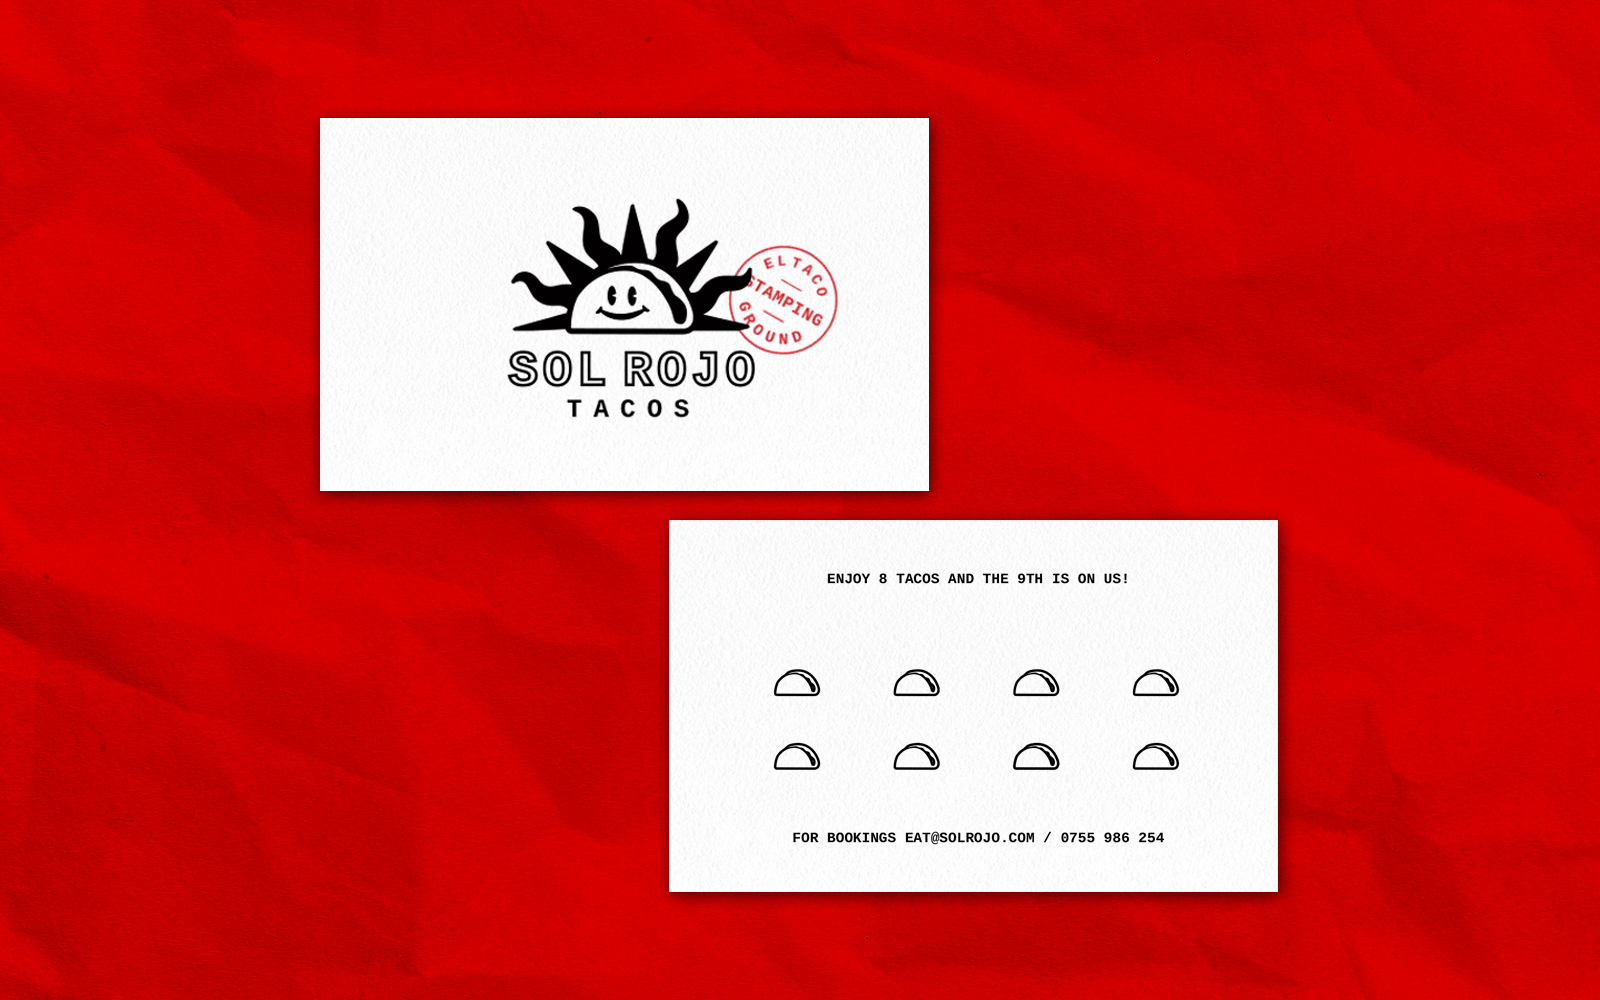 Taco Business Cards Loyalty Card Design